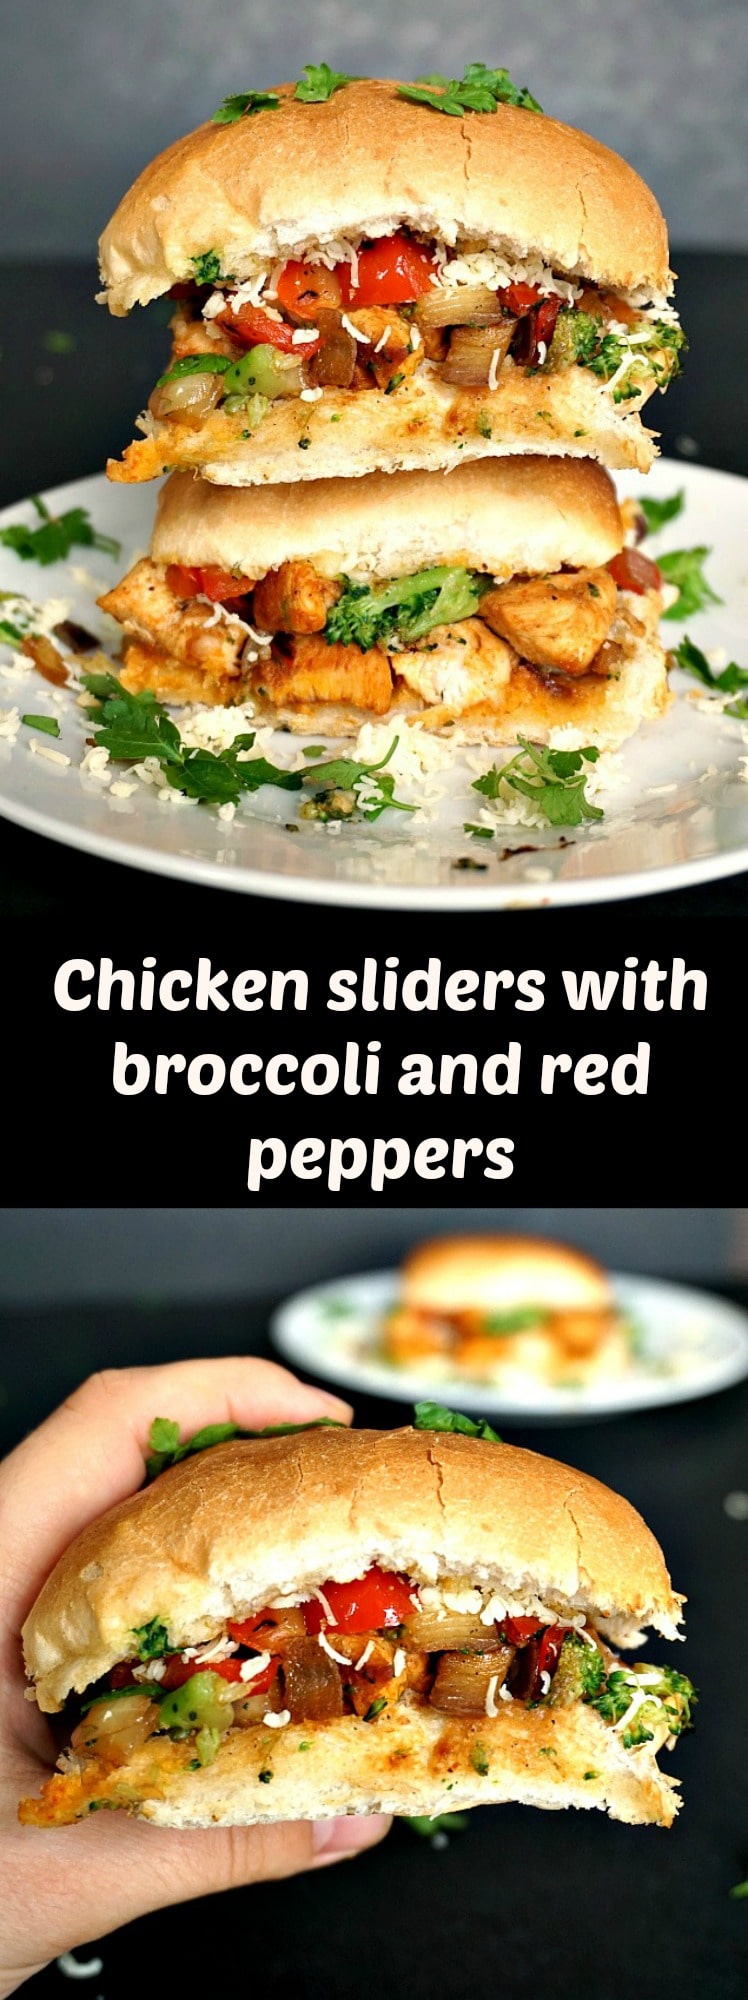 Chicken sliders with broccoli and red peppers